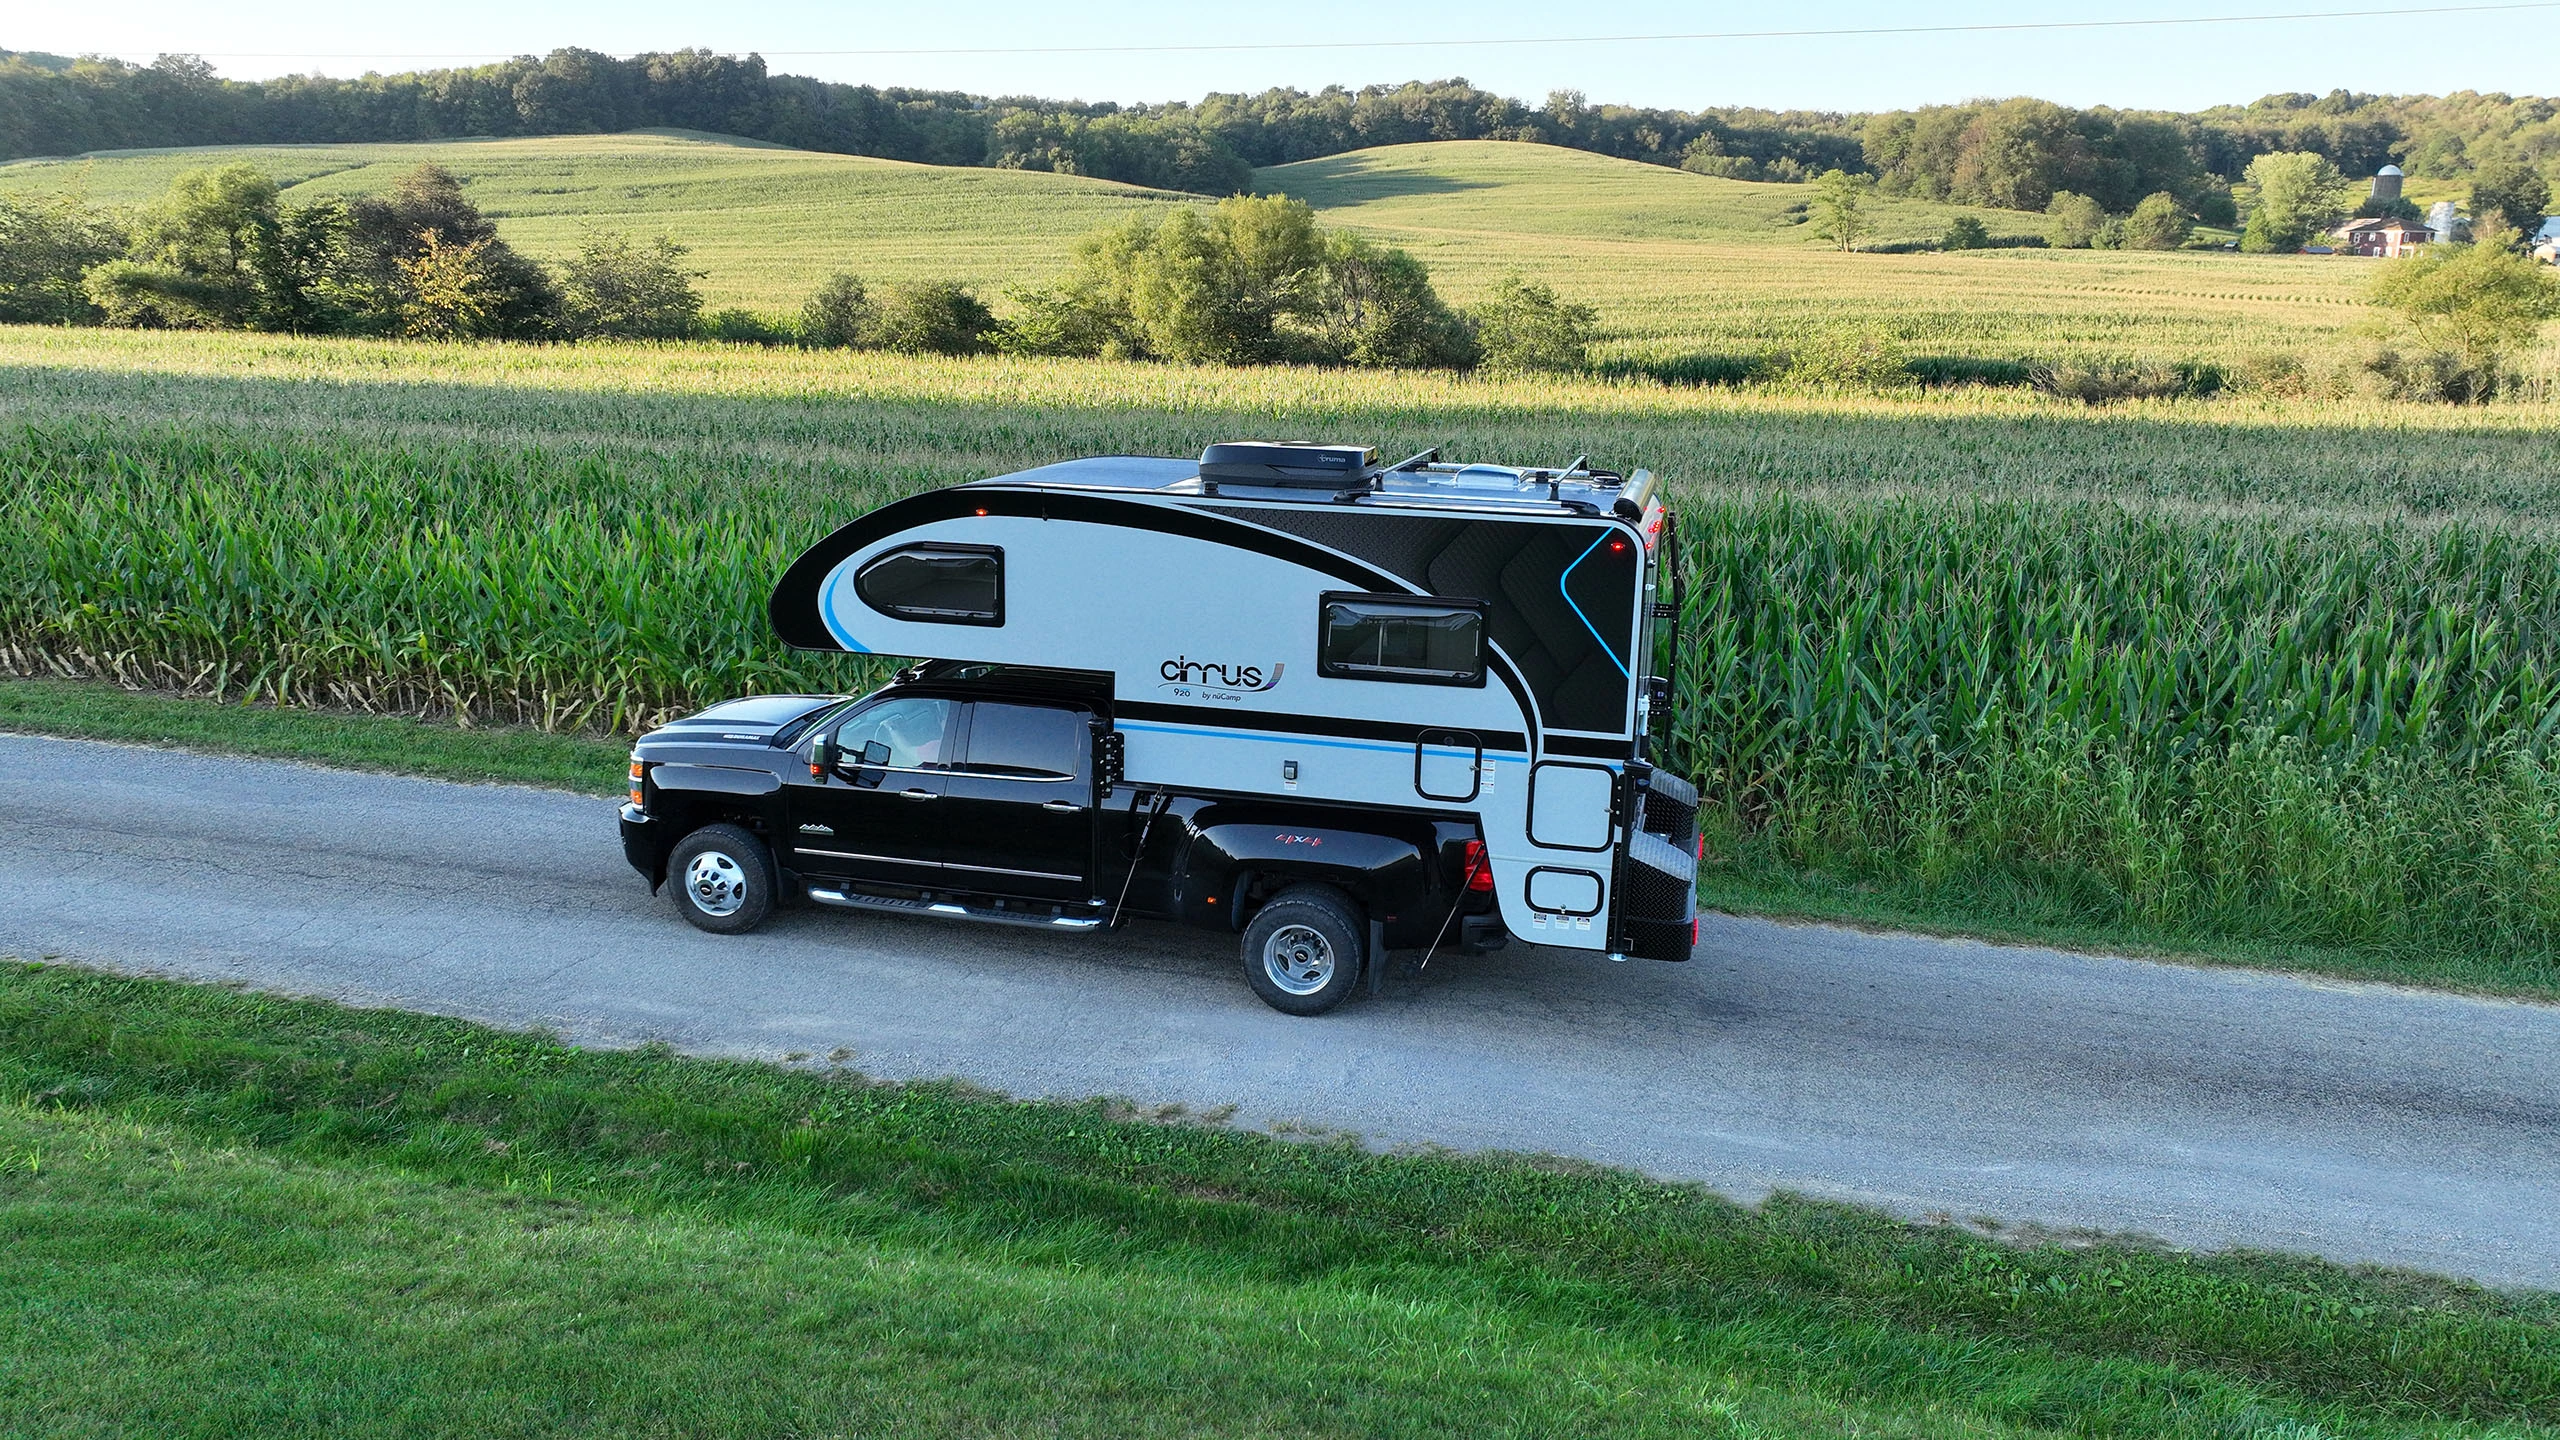 truck with cirrus 920 truck camper in front of corn field